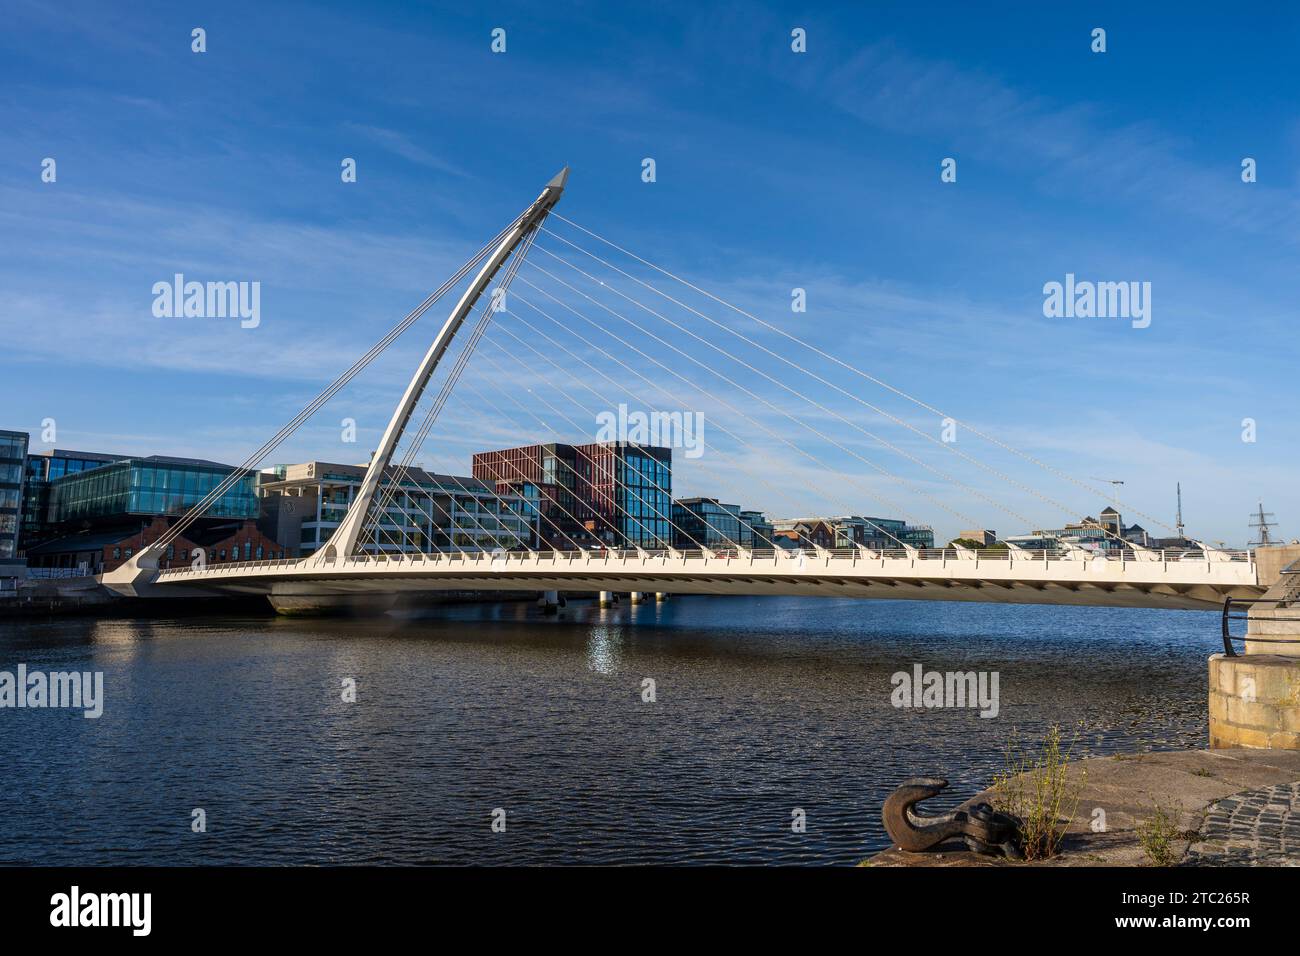 Samuel Beckett Bridge, a cable-stayed swingbridge in Dublin, Ireland, on the south side of the River Liffey in the Docklands area. Stock Photo